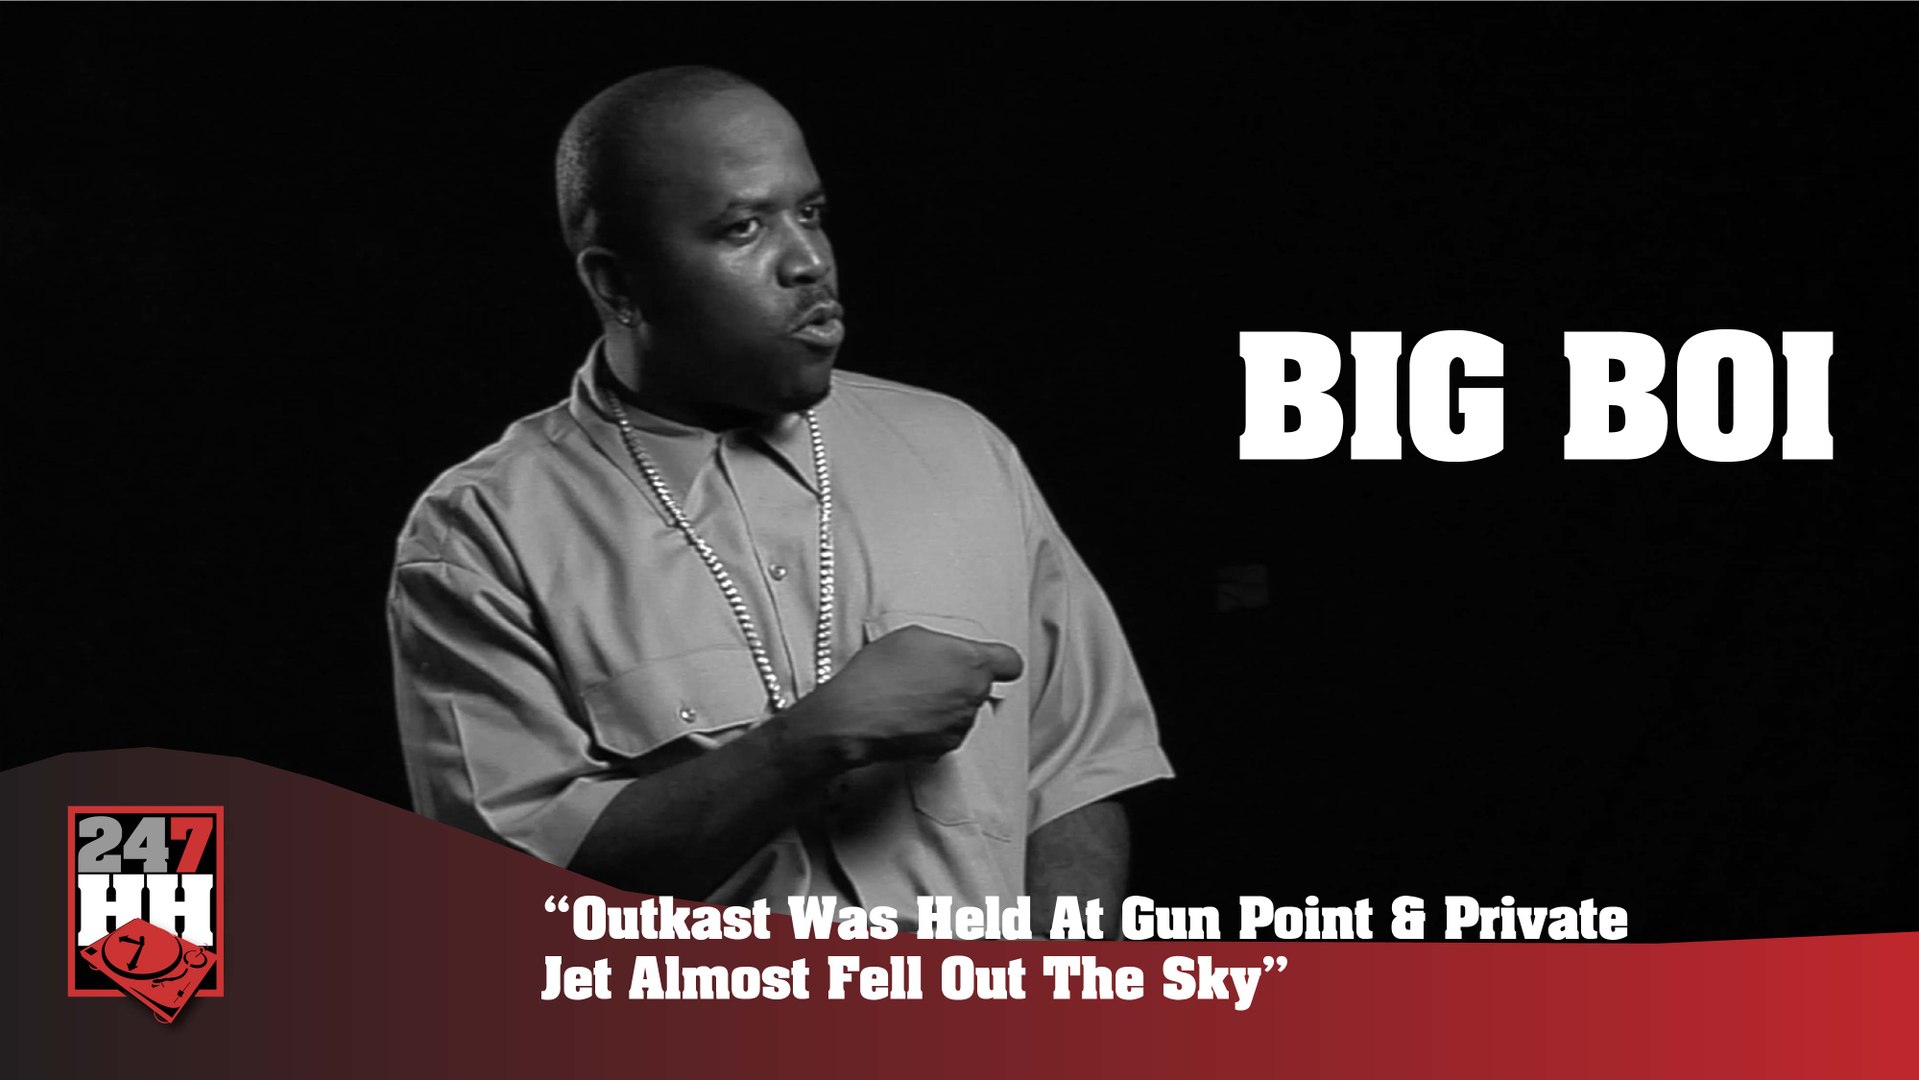 ⁣Big Boi - Outkast Was Held At Gun Point, Private Jet Almost Fell Out The Sky (247HH Archives) (247HH